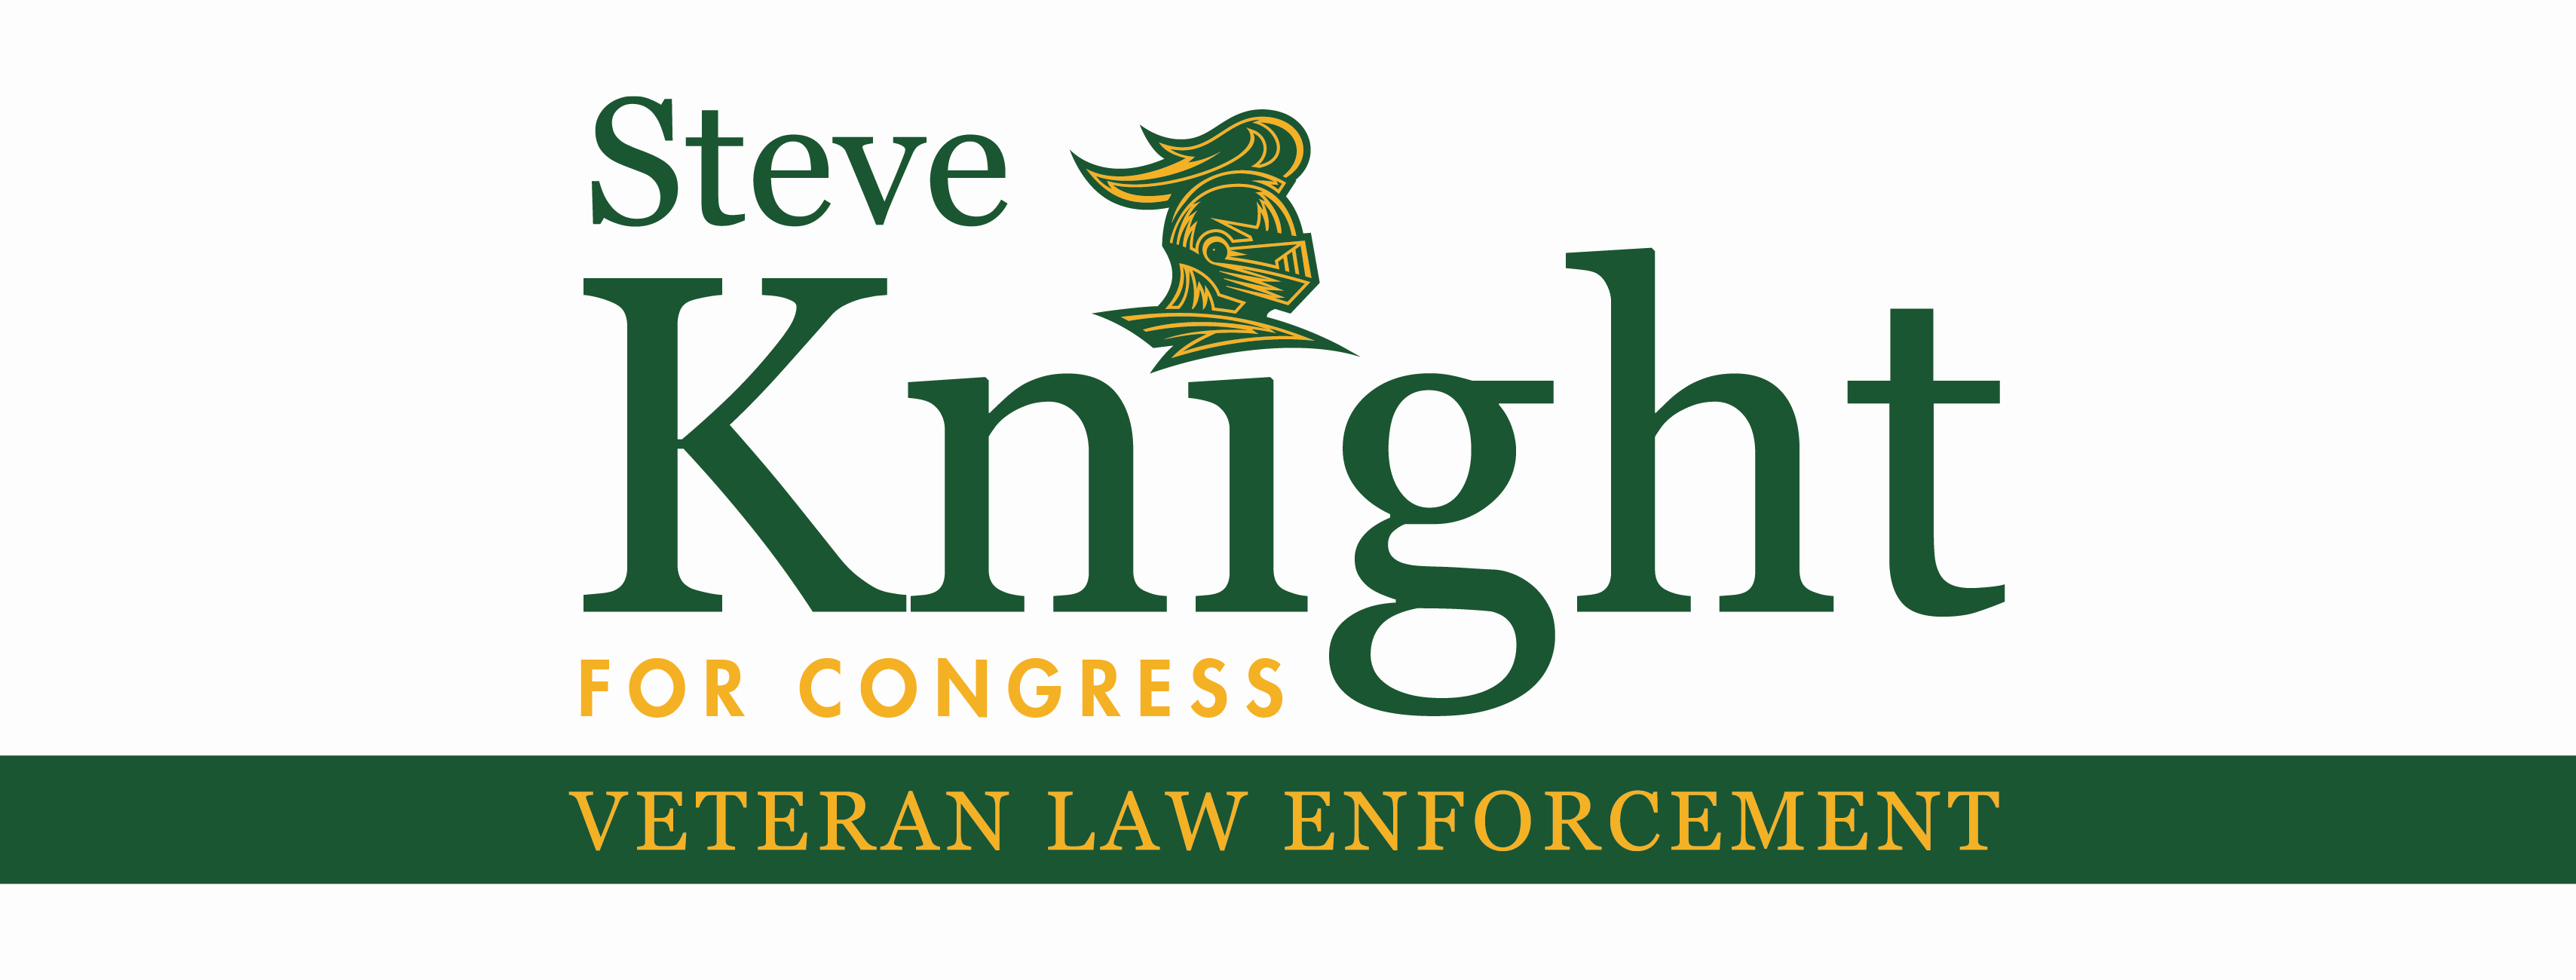 Knight for Congress